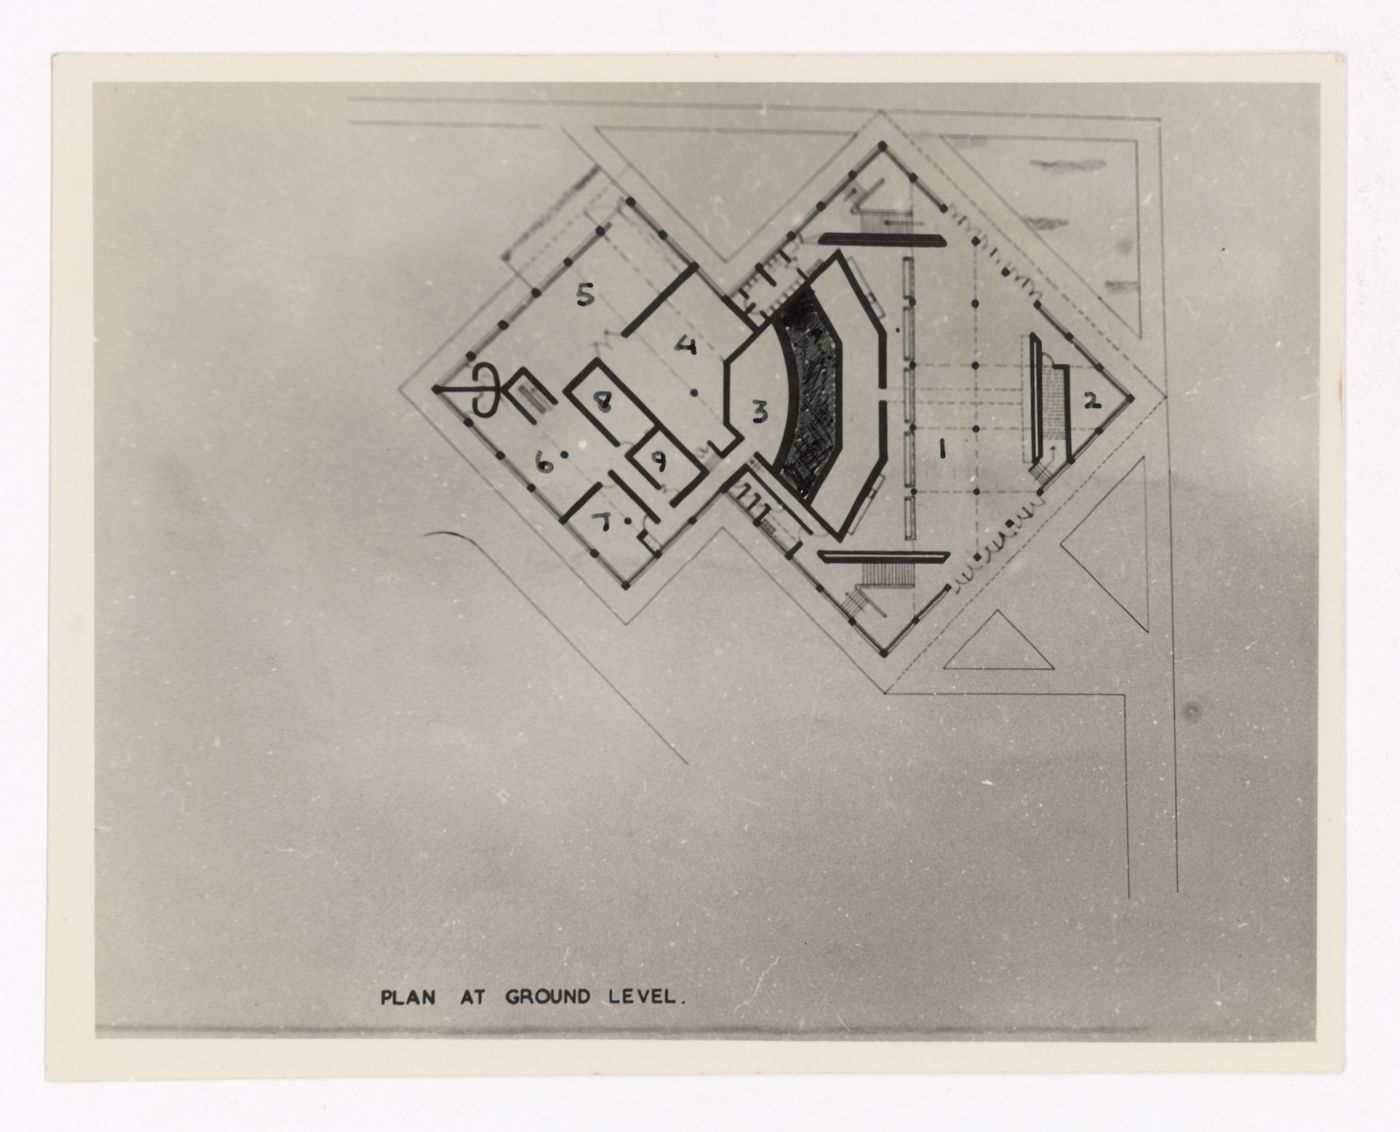 Photographic reproduction of ground level plan for Tagore Theatre, Chandigarh, India